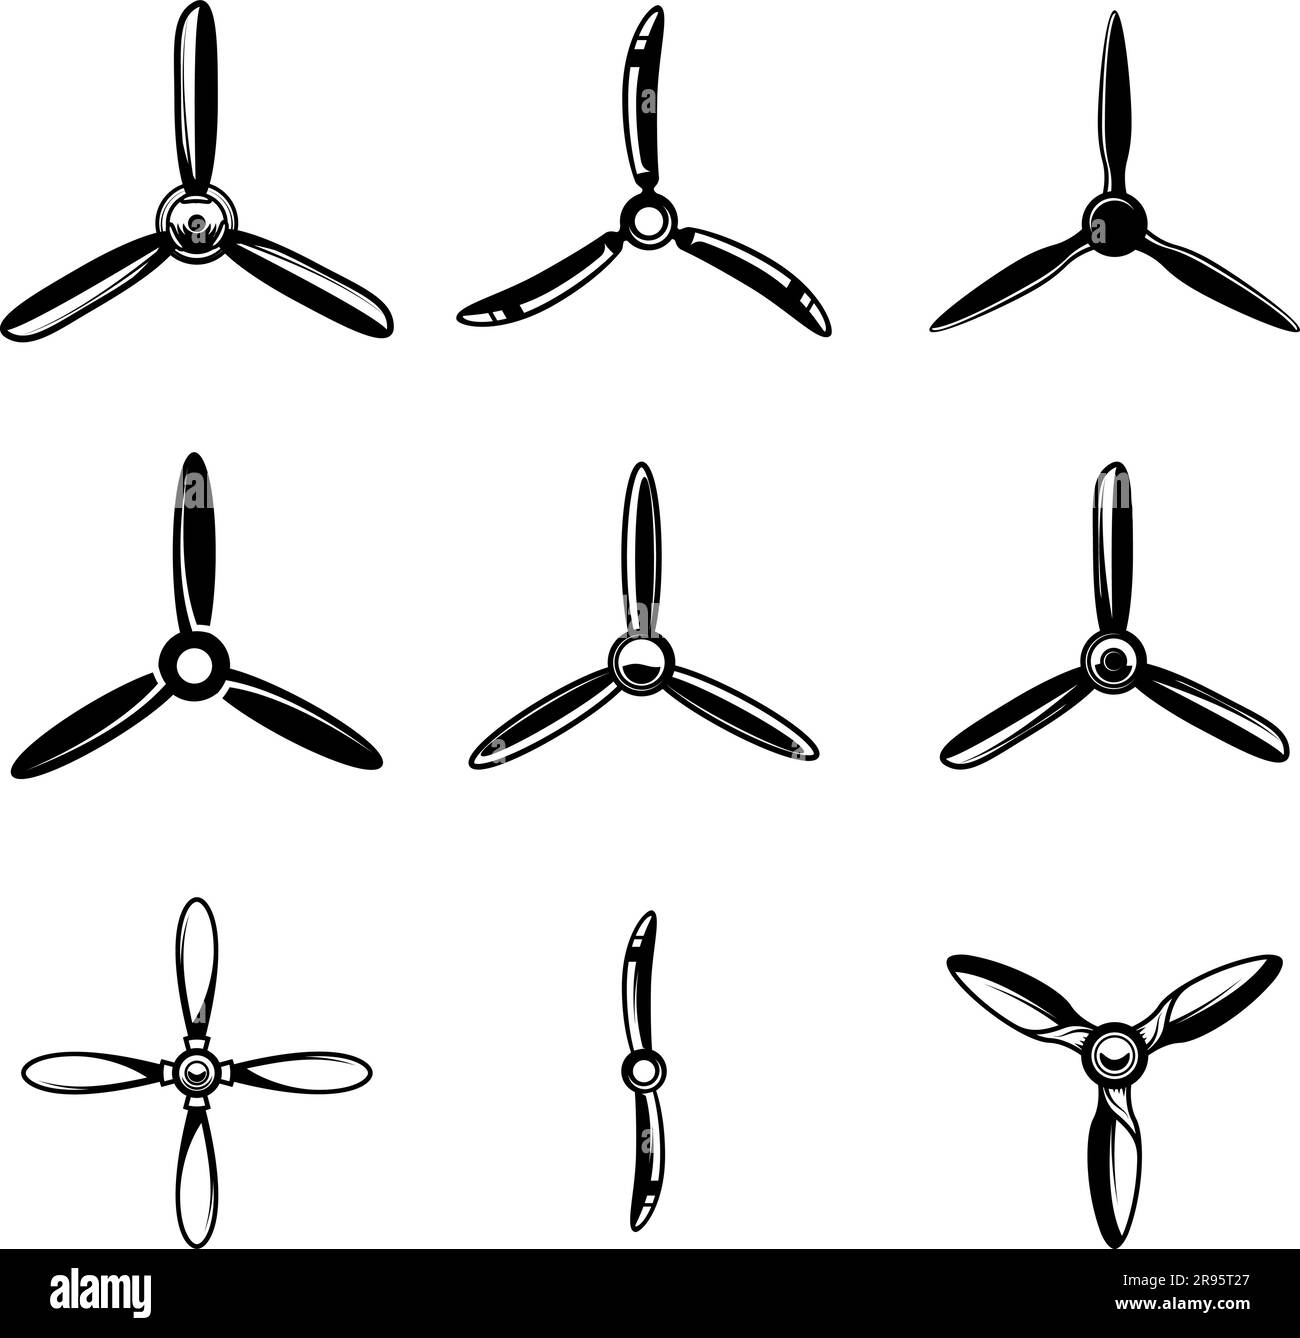 A collection of vector illustrations of airplane propellers. Perfect for aviation-themed designs. Use them for posters, logos, websites, and more Stock Vector